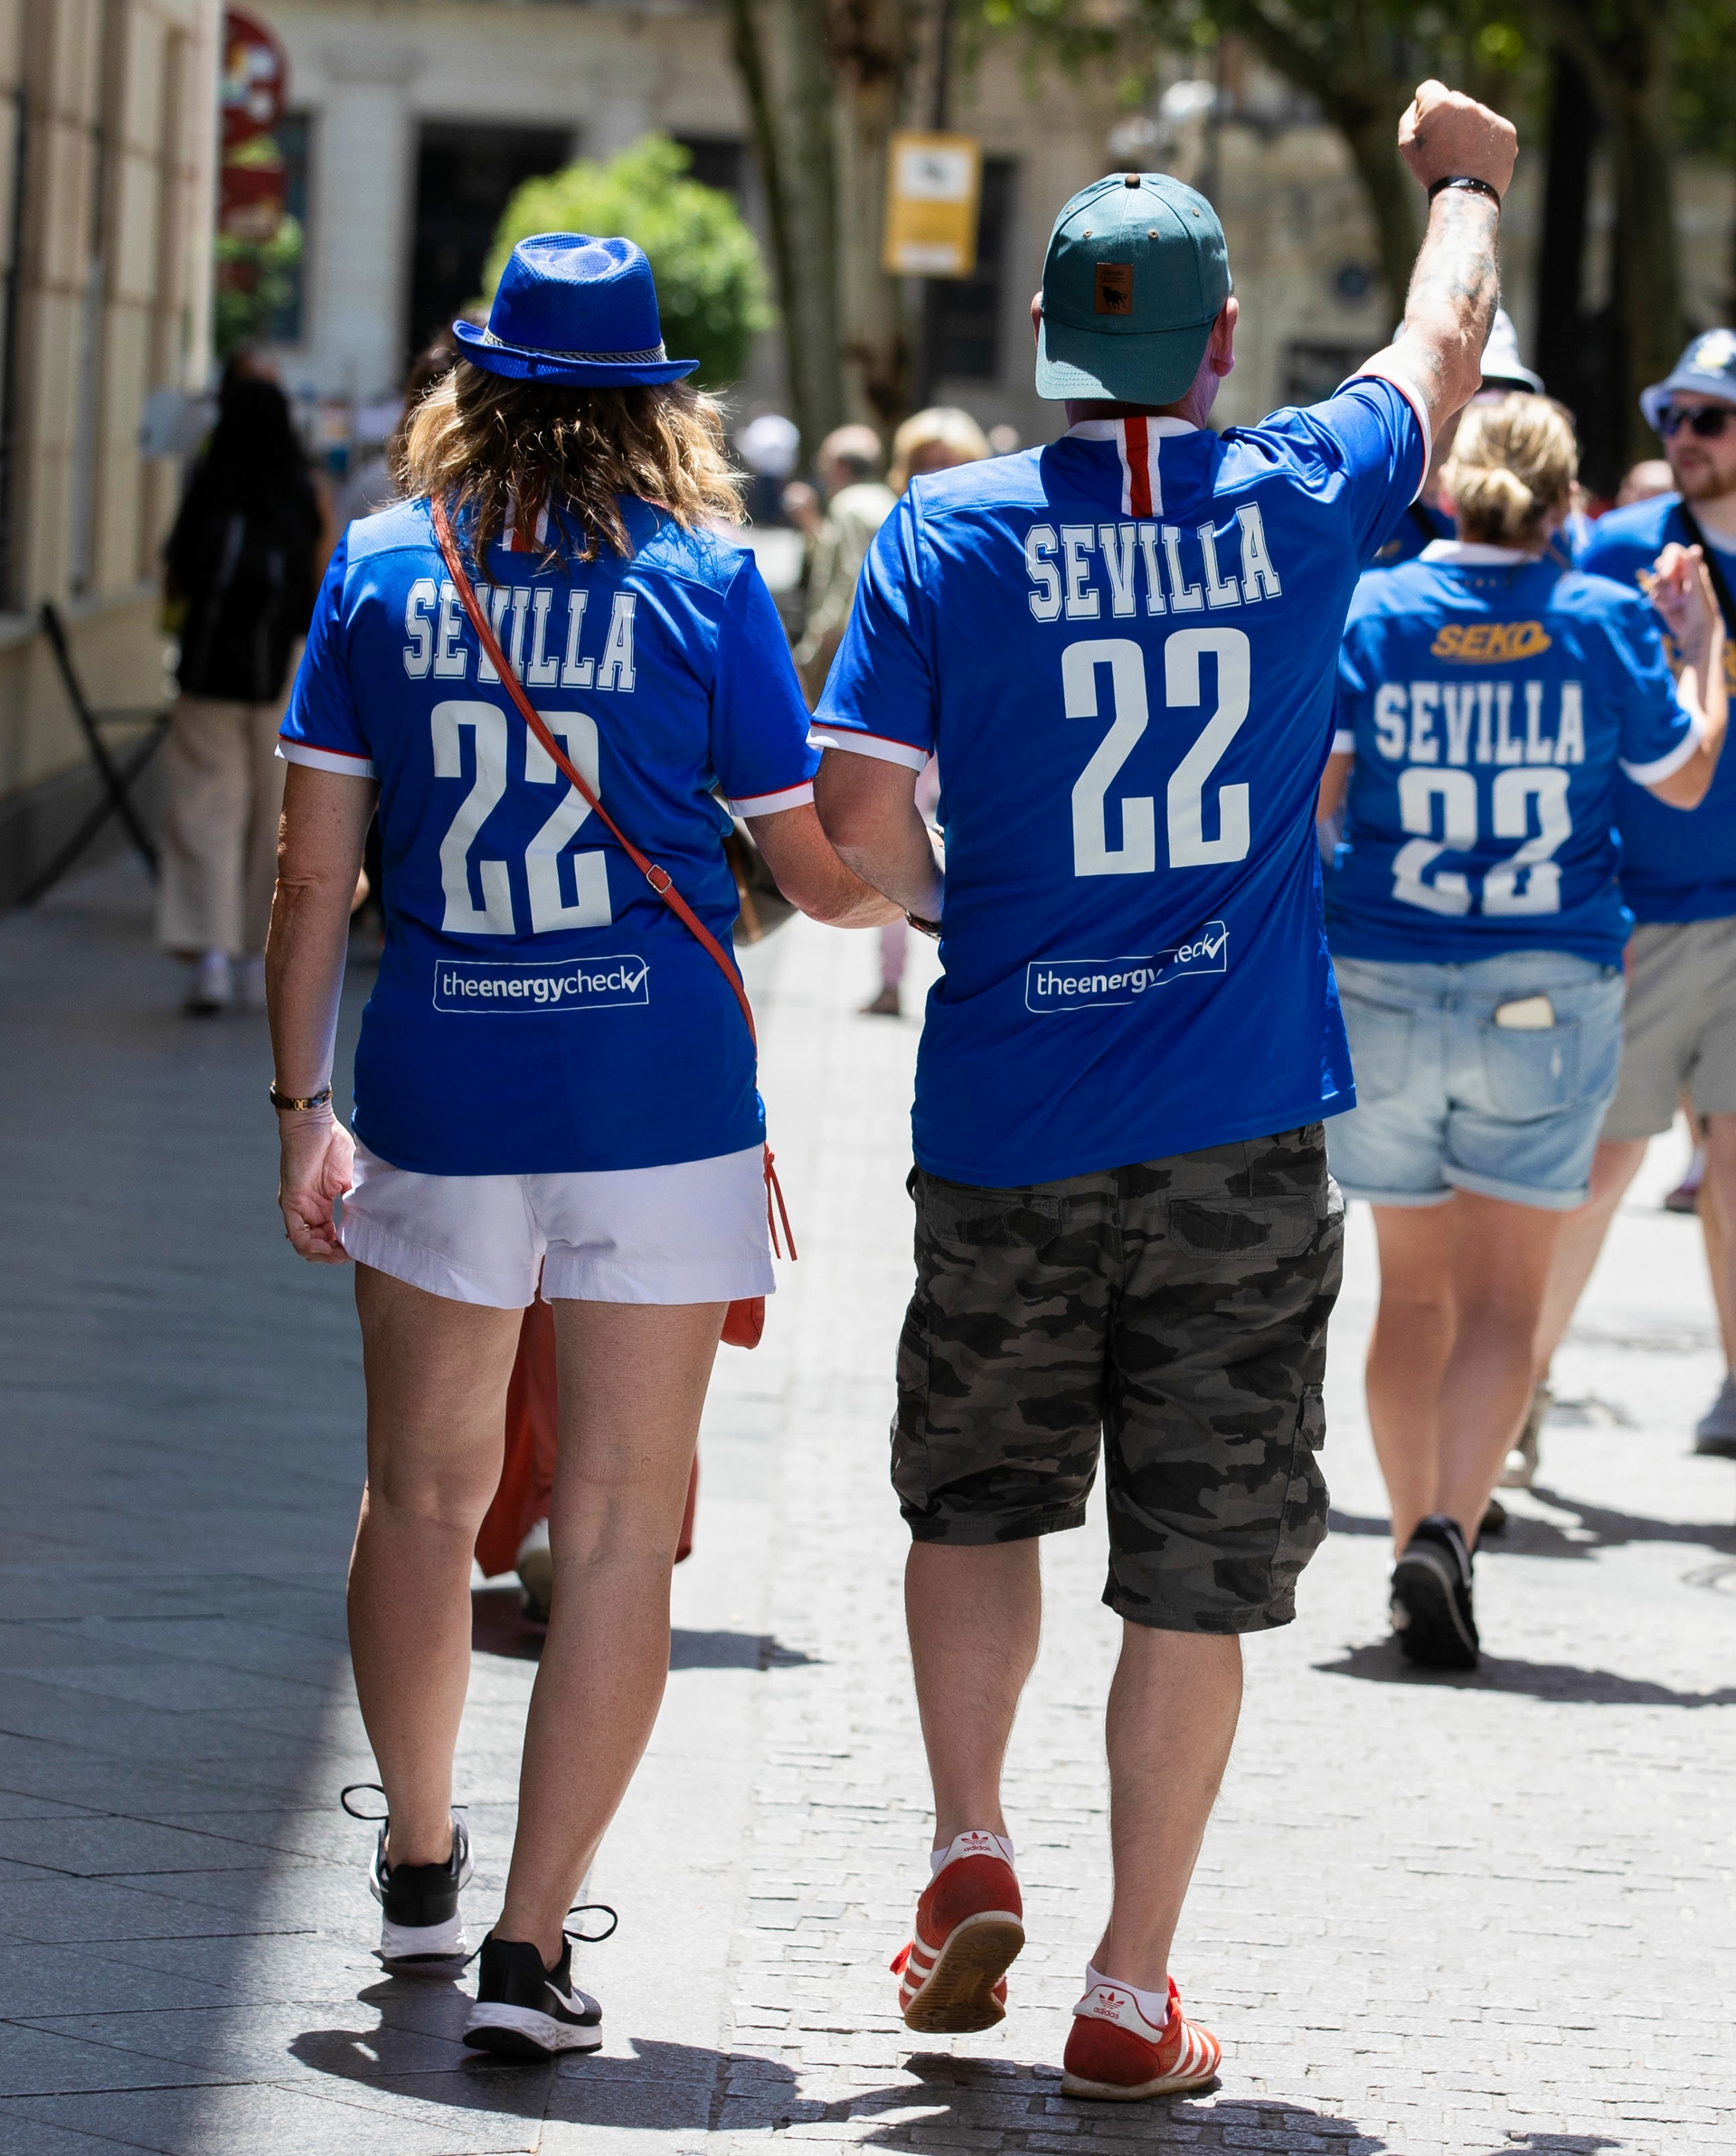 Rangers fans in Seville ahead of the UEFA Europa League Final, on May 18.